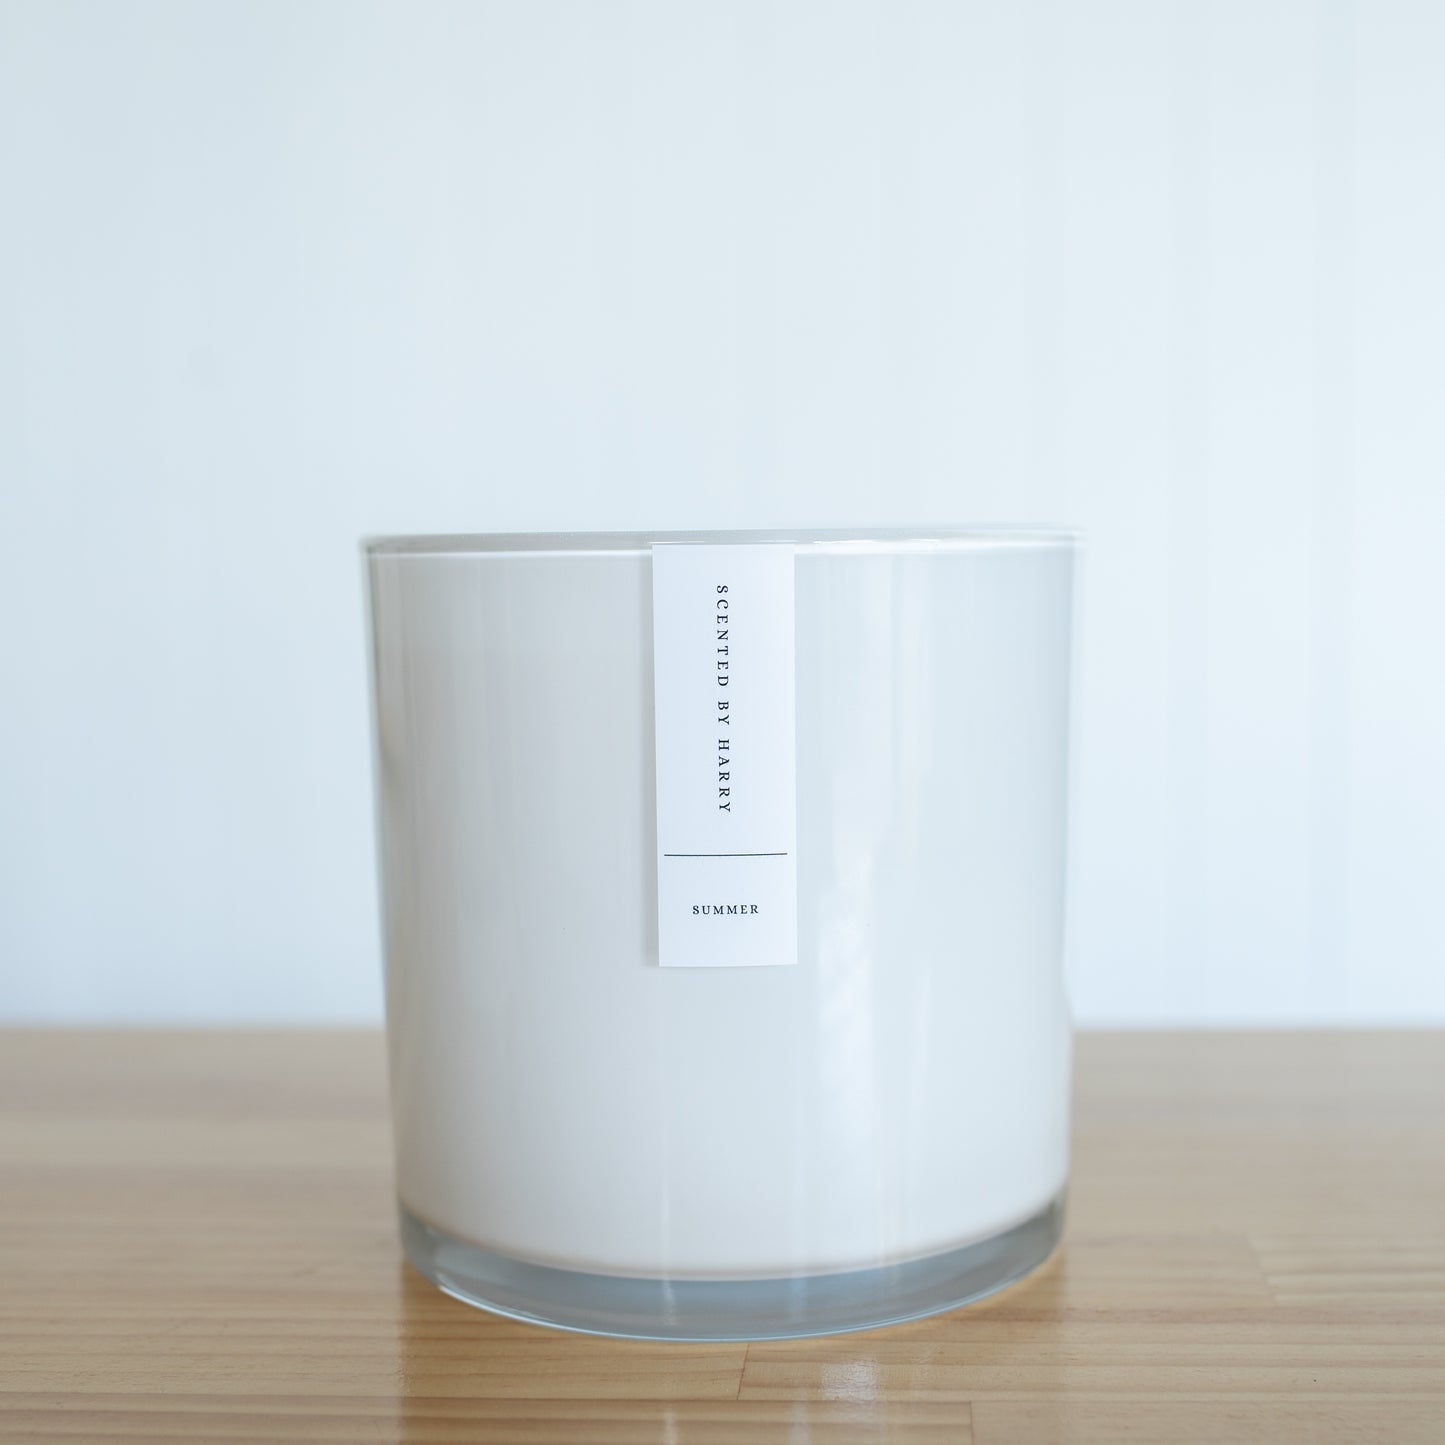 Summer Deluxe Candle XL - 1600g